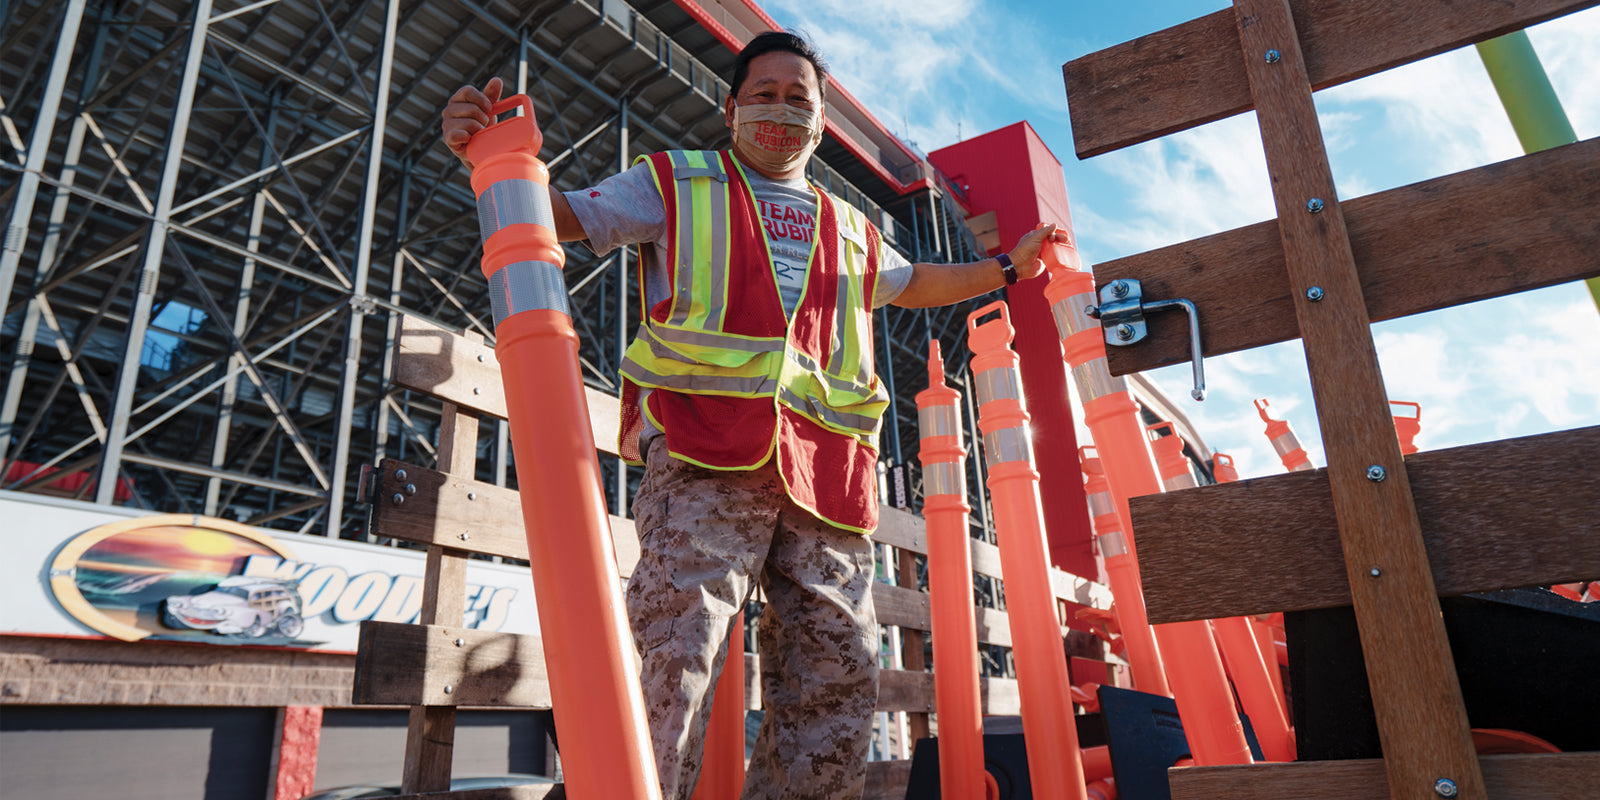 A Team Rubicon volunteer in a construction vest and mask stands holding traffic cones.